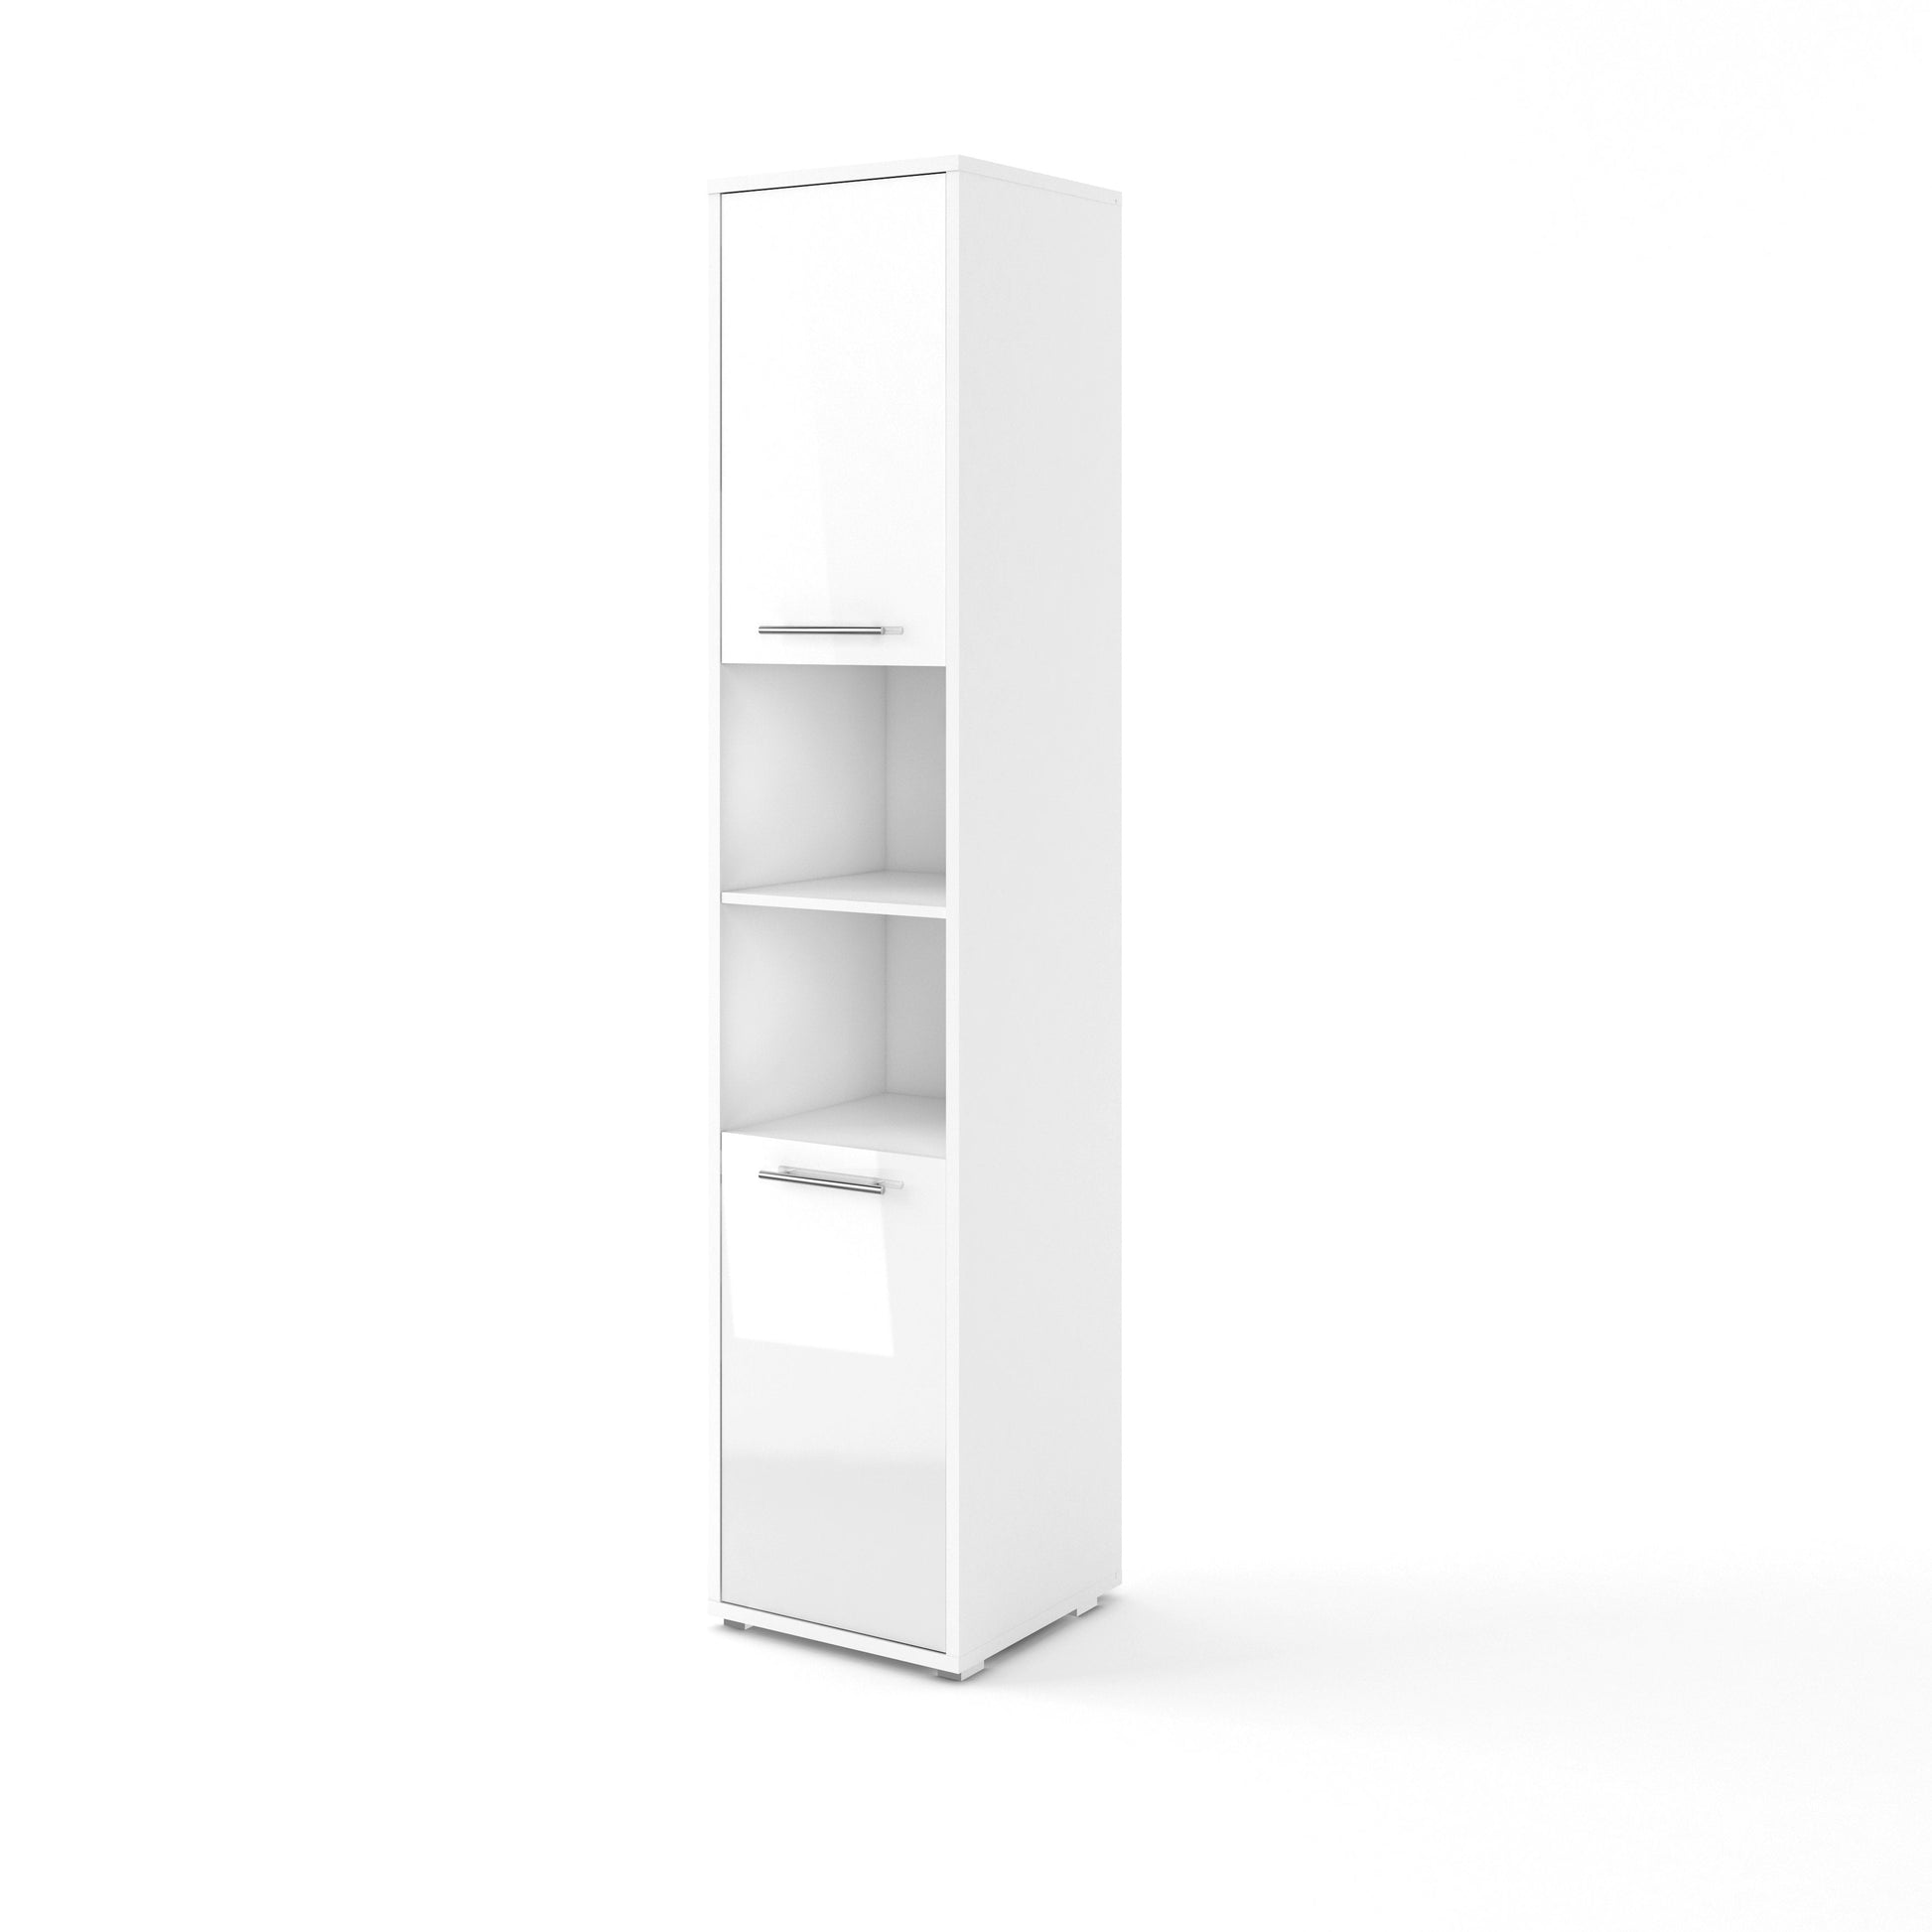 CP-08 Tall Storage Cabinet for Vertical Wall Bed Concept White Gloss Tall Storage Cabinet 